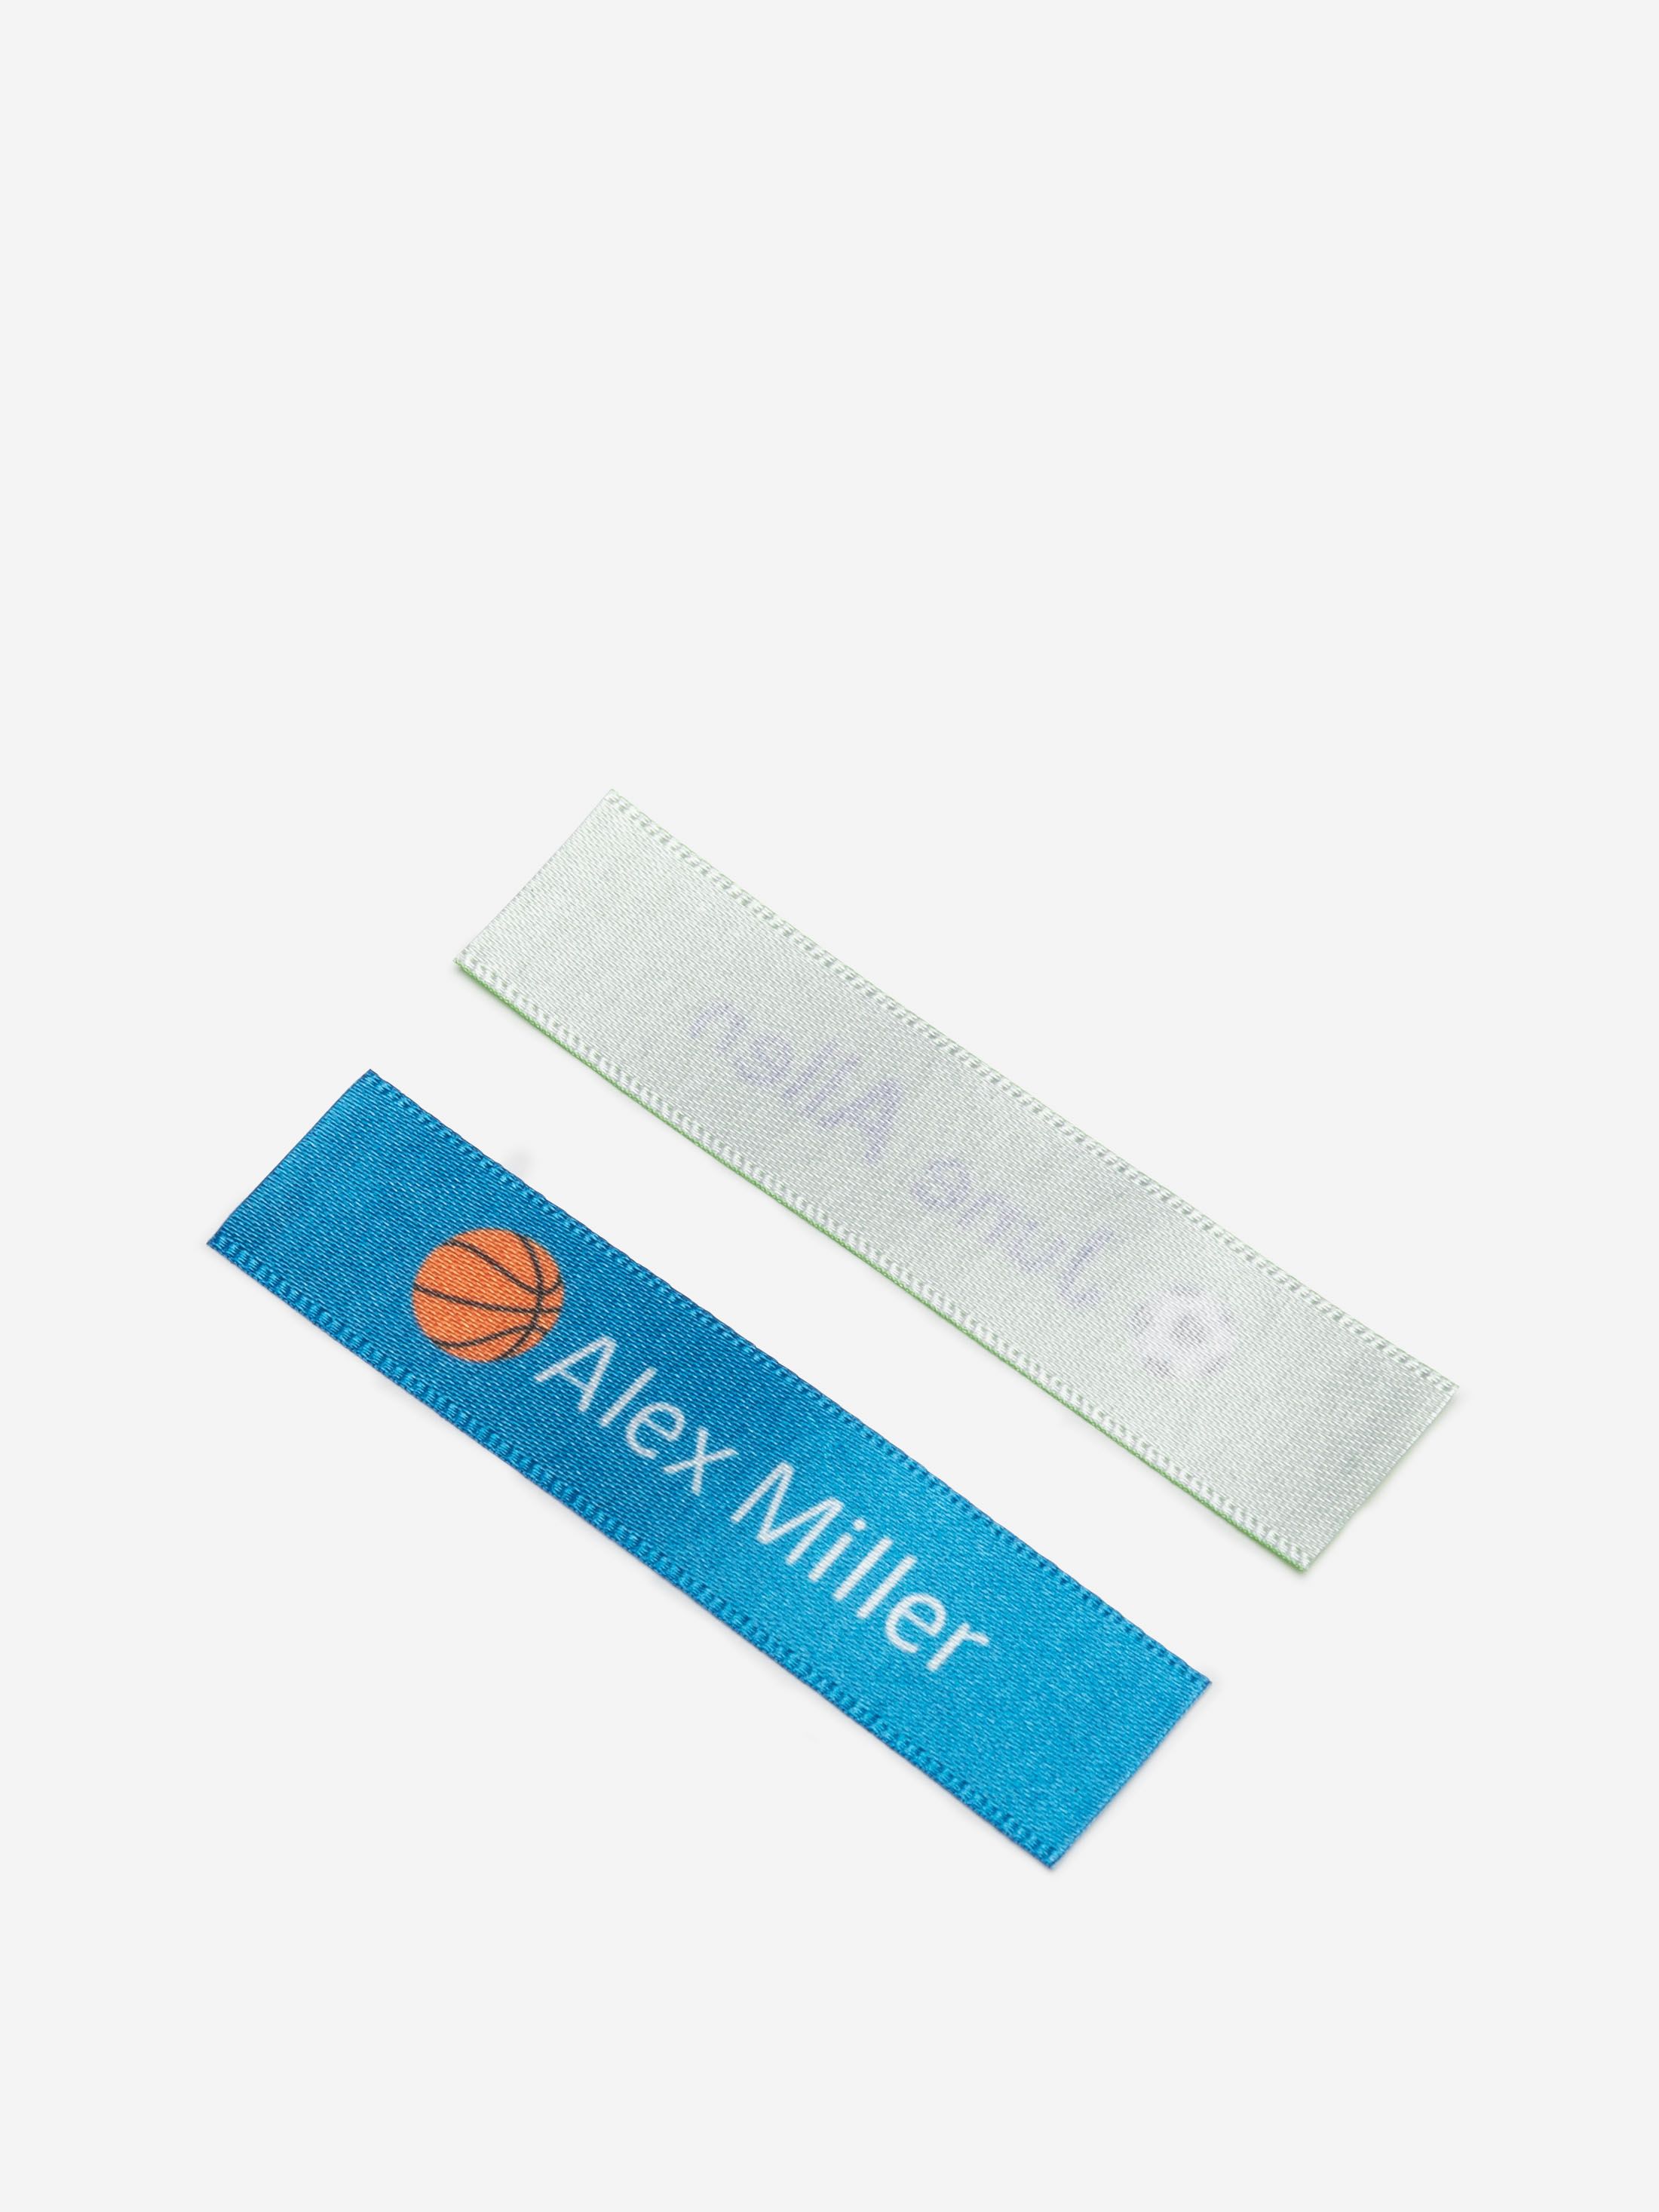 fabric name labels front and back